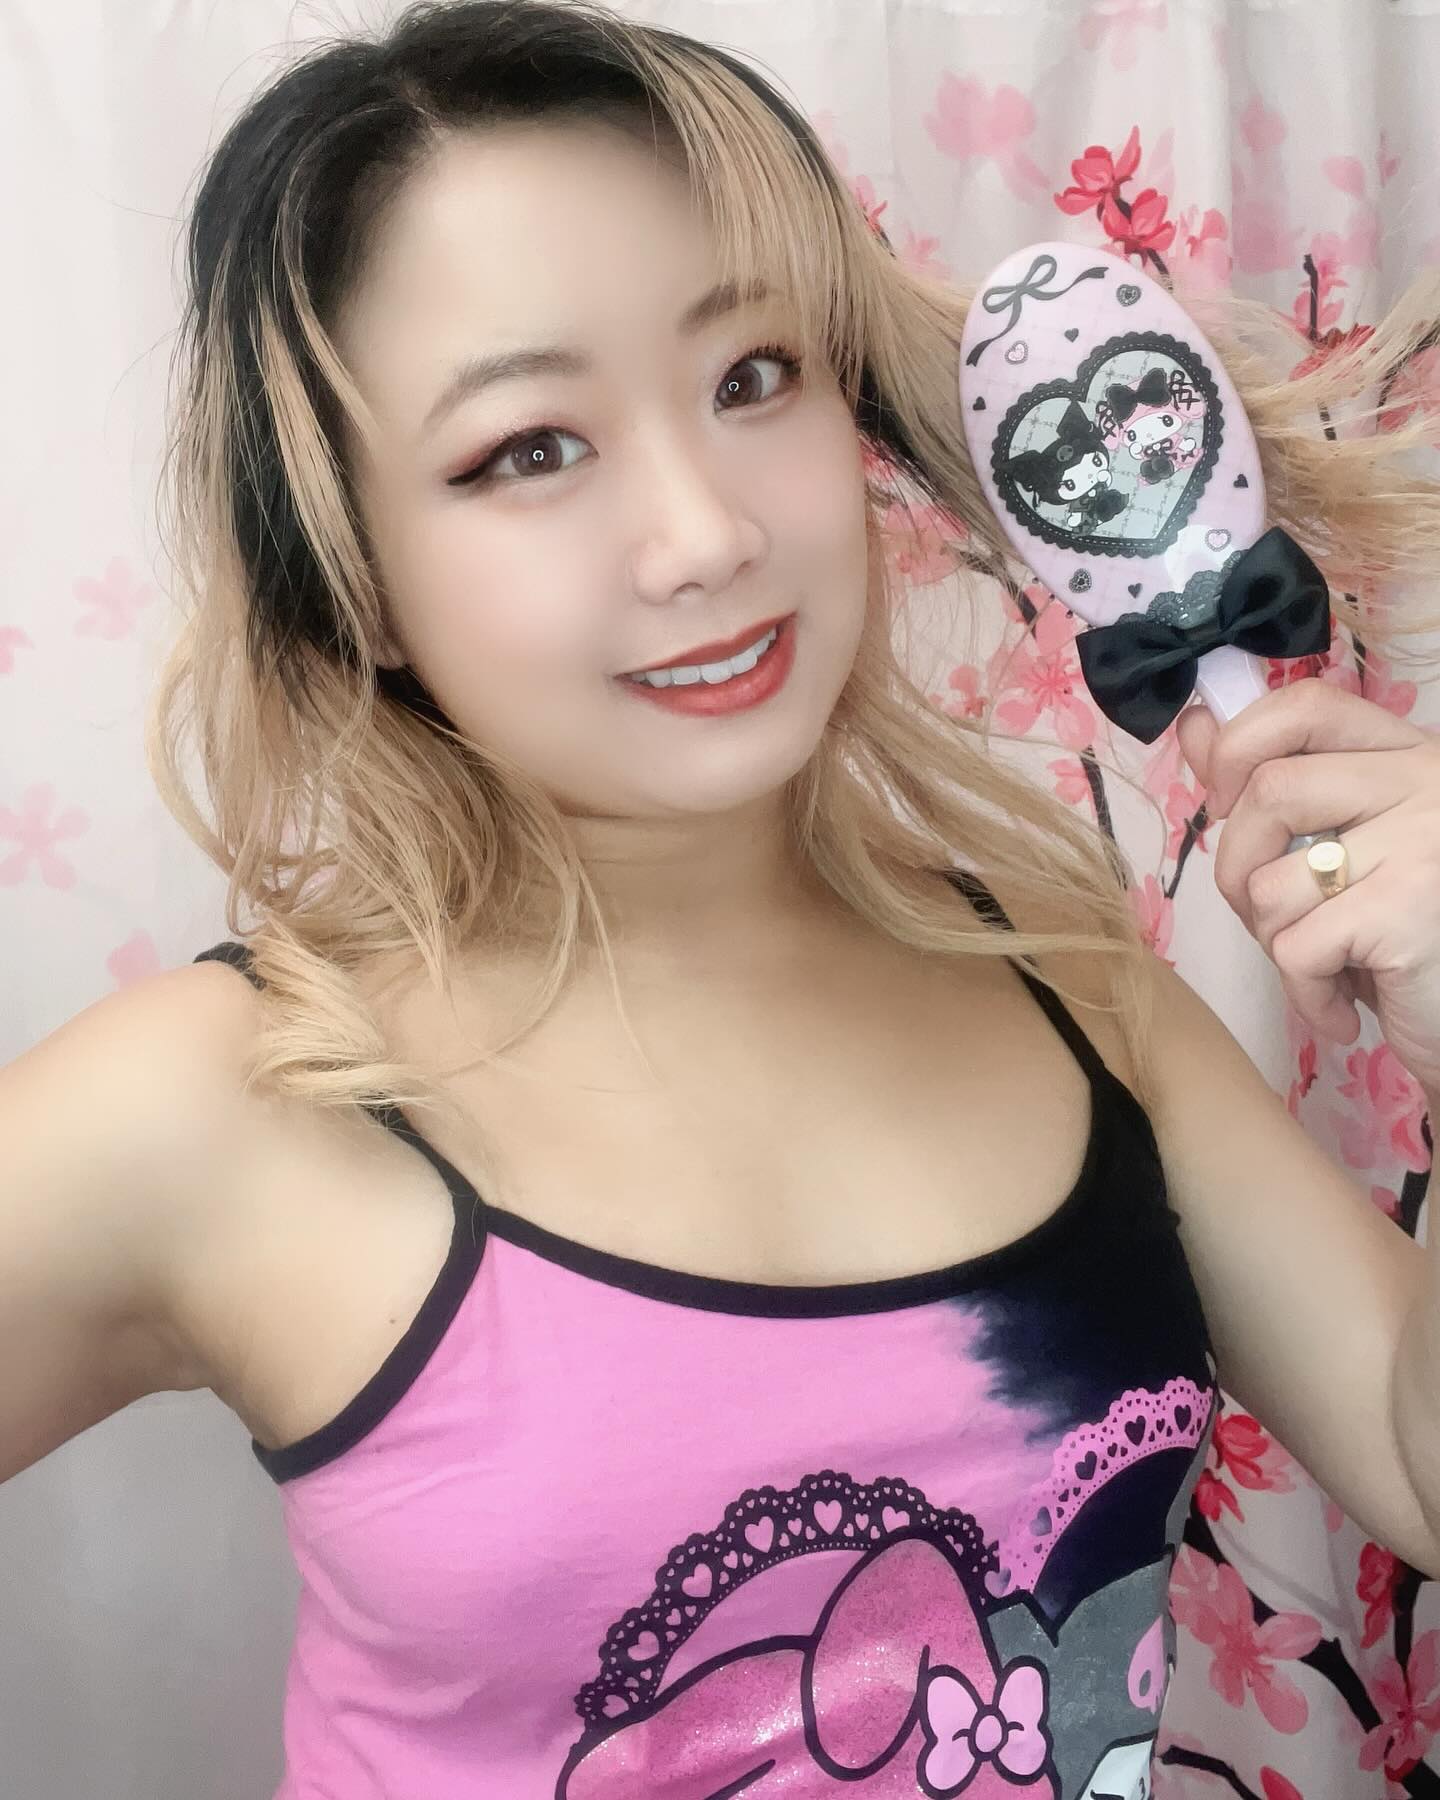 Thank you @hottopic for this adorable My Melody X Kuromi cami and My Melody x Kuromi Lolita-inspired hairbrush. 🖤🩷 sooo cute!!! 😍
➡️ Swipe to see more photos ➡️
__
#sponsoredbyHT #HTFxMarchMustHaves #hottopic #htfanatic #sanrio #mymelody #kuromi #mymelo #mymelodyxkuromi #kuromixmymelody #kawaii #lolitainspired